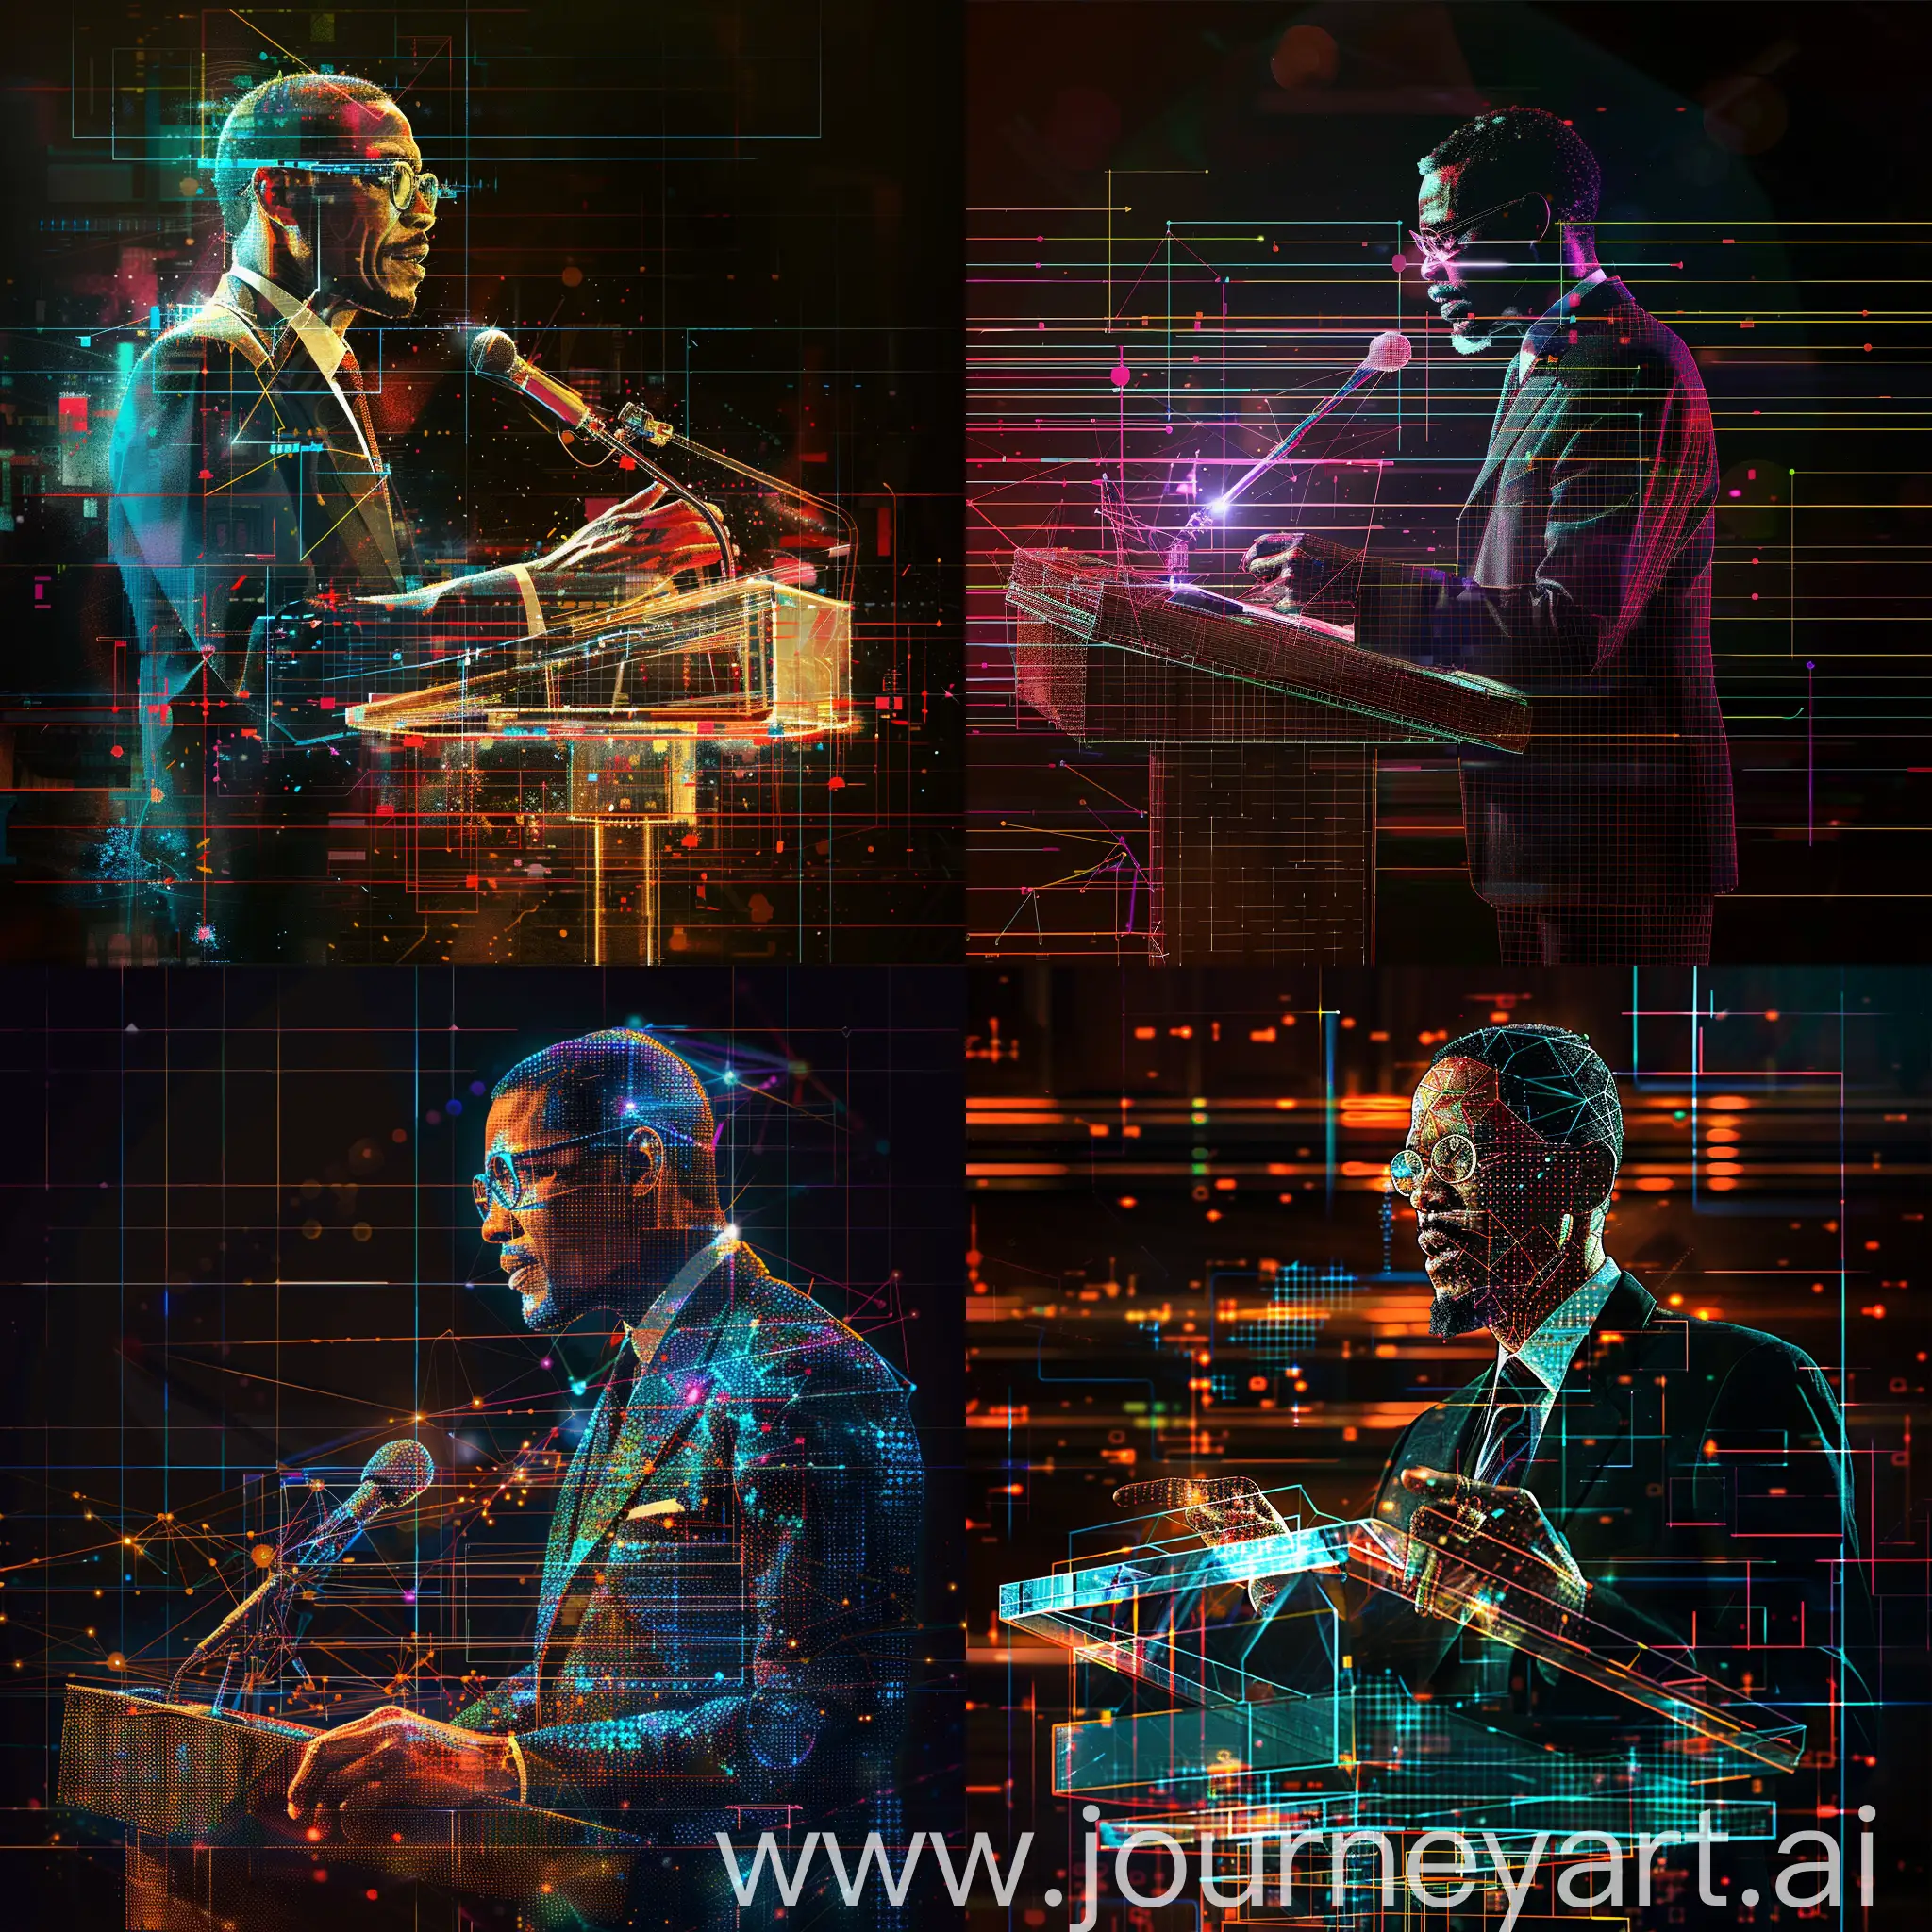 Malcolm-X-Delivering-a-Futuristic-Speech-with-Dynamic-Lighting-and-Vibrant-Colors